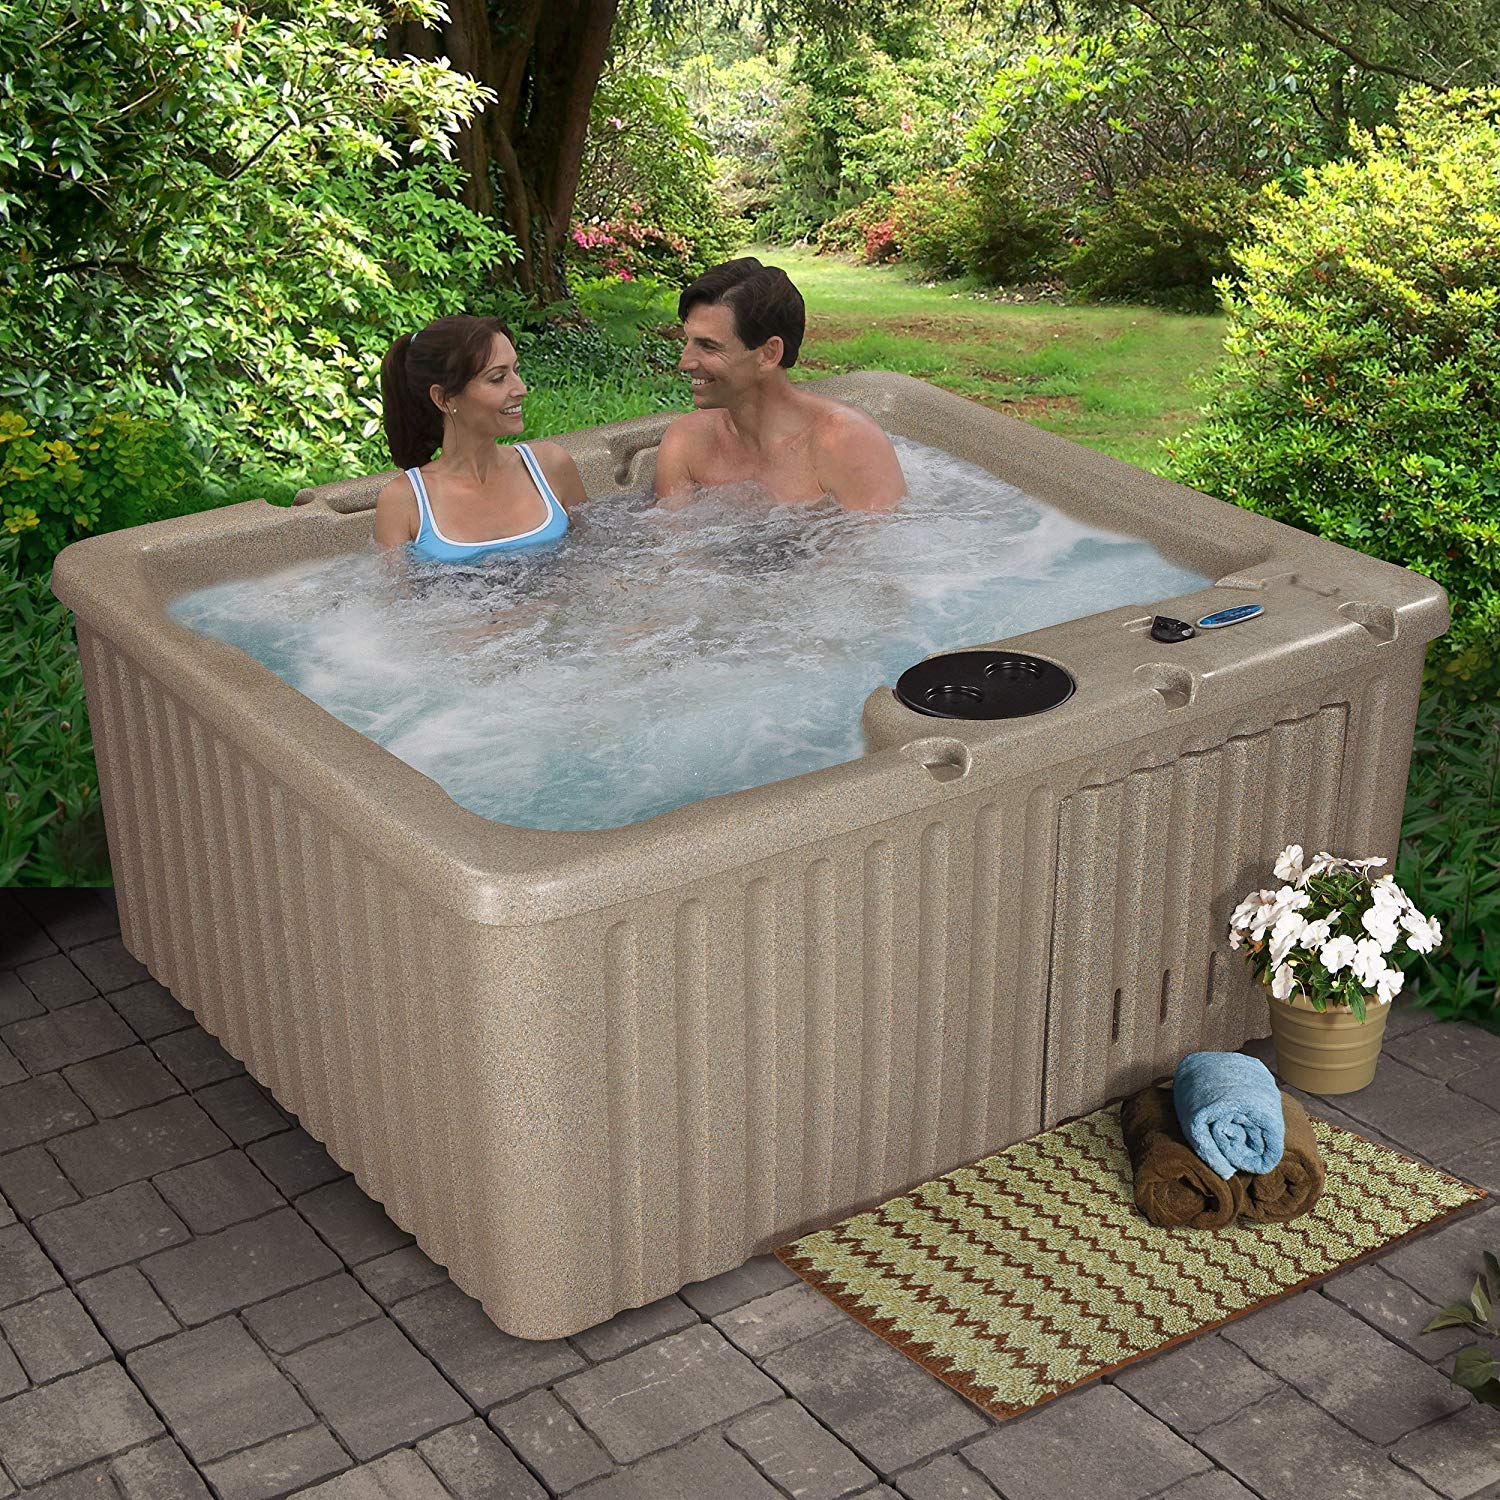 Top 10 Best Hot Tubs For The Money 2021 Reviews